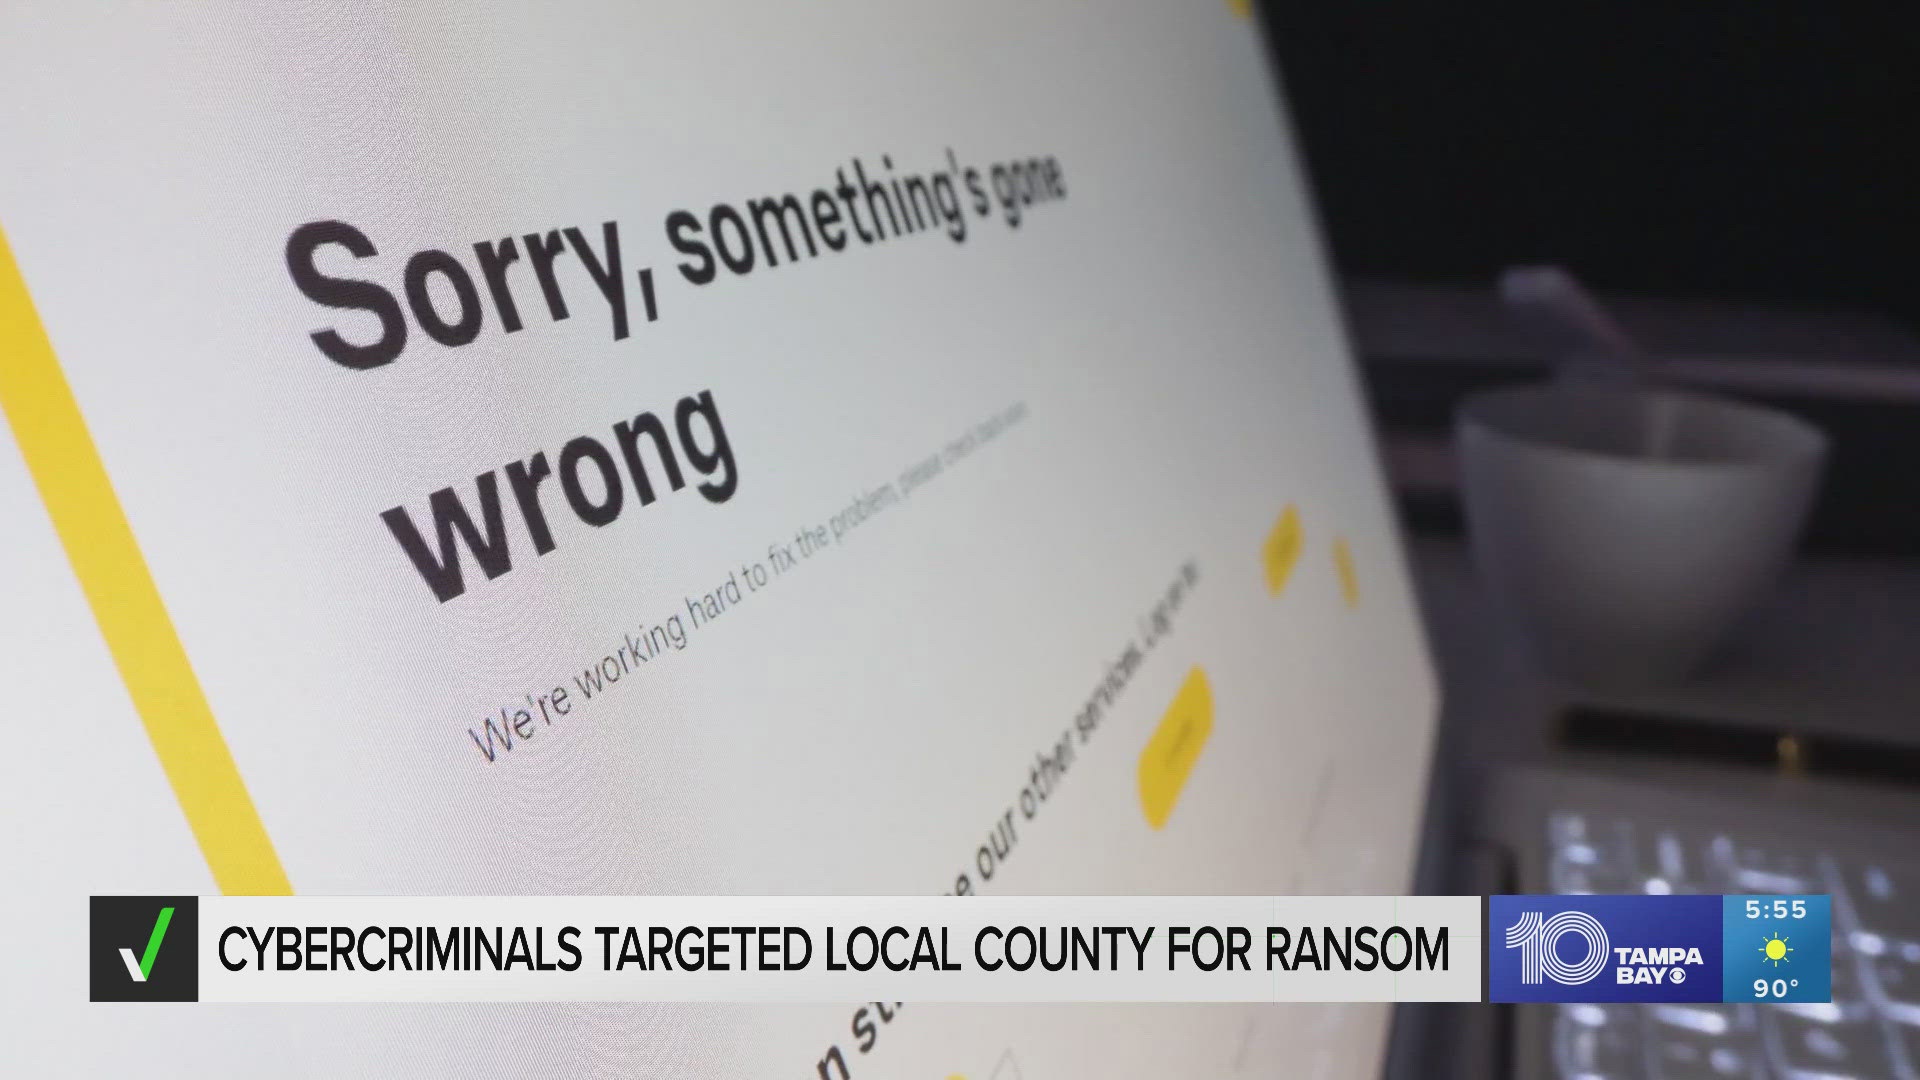 Officials say it started with a network interruption. Now the county is trying to figure out whose private information was up for auction on the dark web.